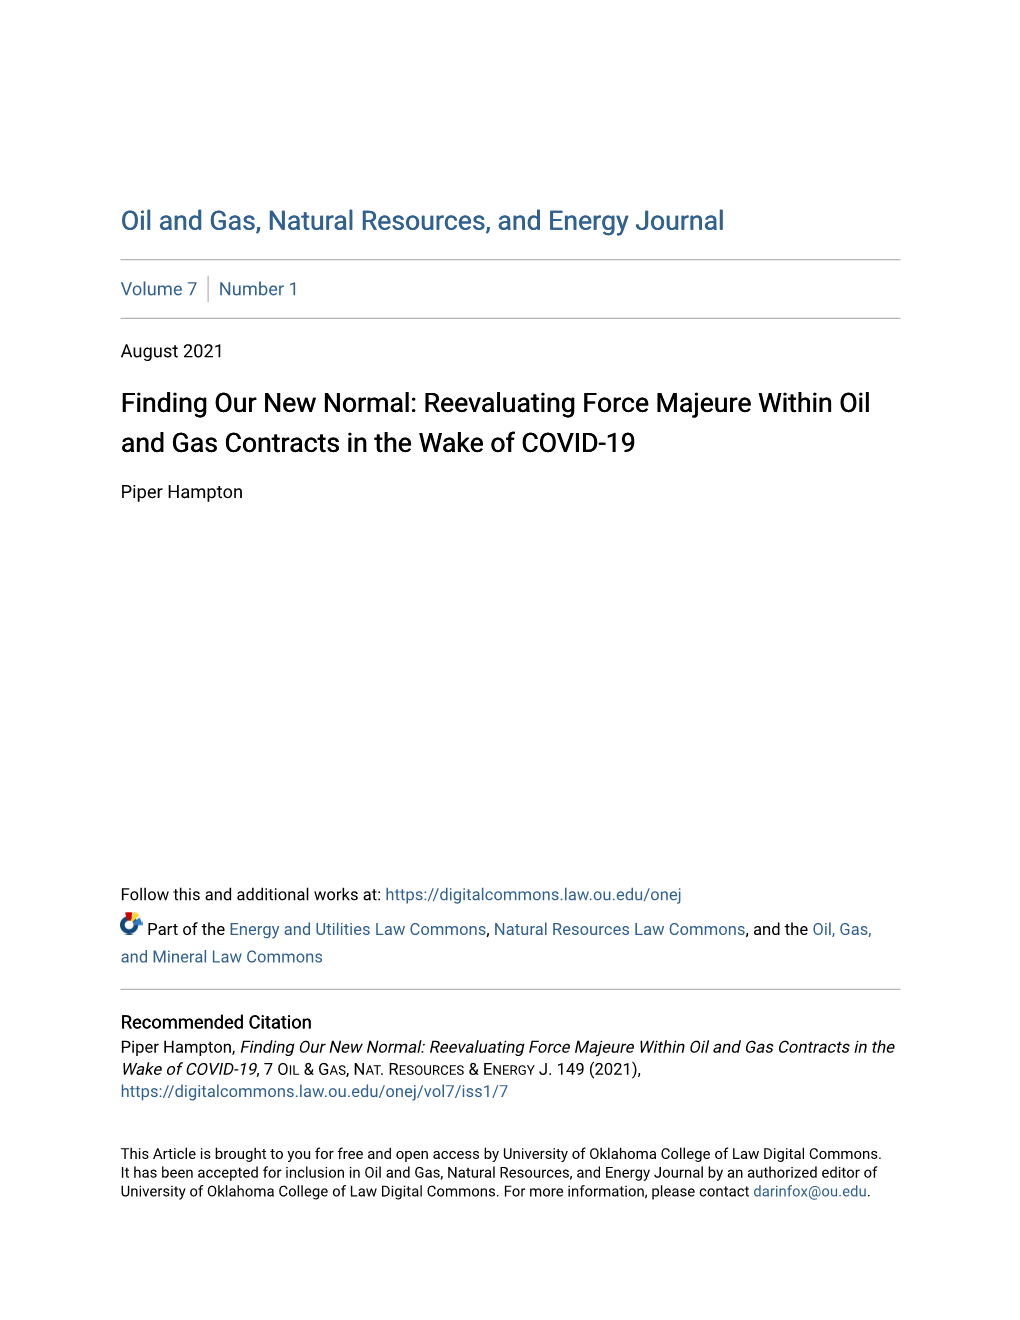 Reevaluating Force Majeure Within Oil and Gas Contracts in the Wake of COVID-19